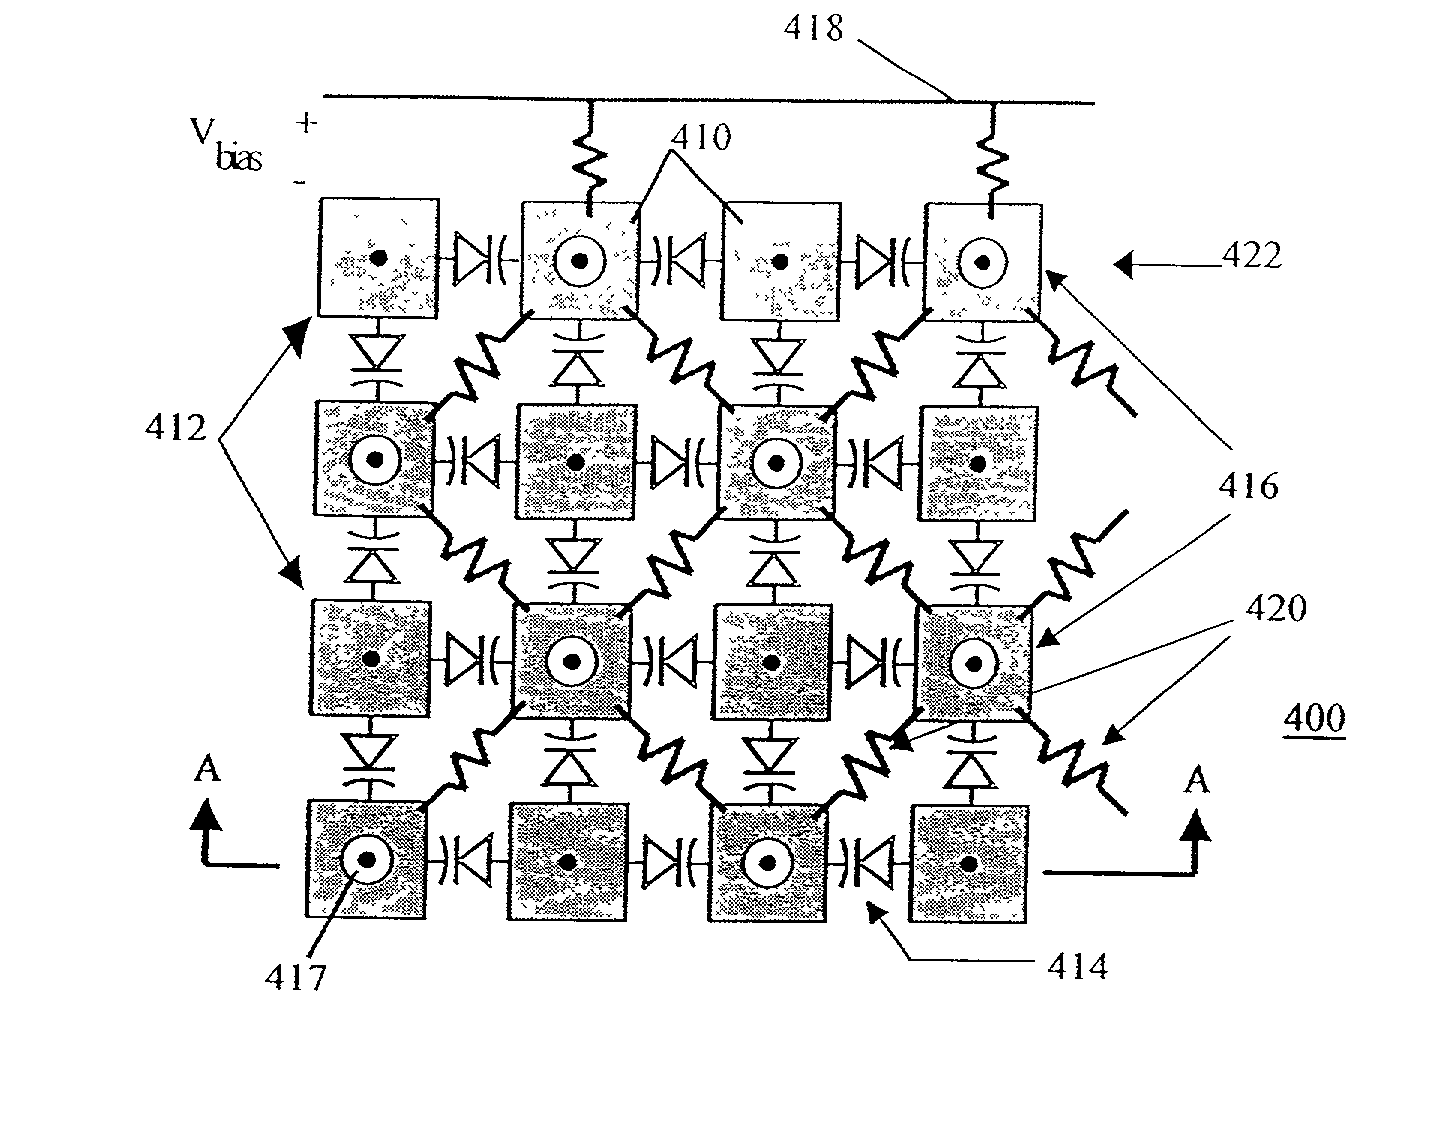 Reconfigurable artificial magnetic conductor using voltage controlled capacitors with coplanar resistive biasing network